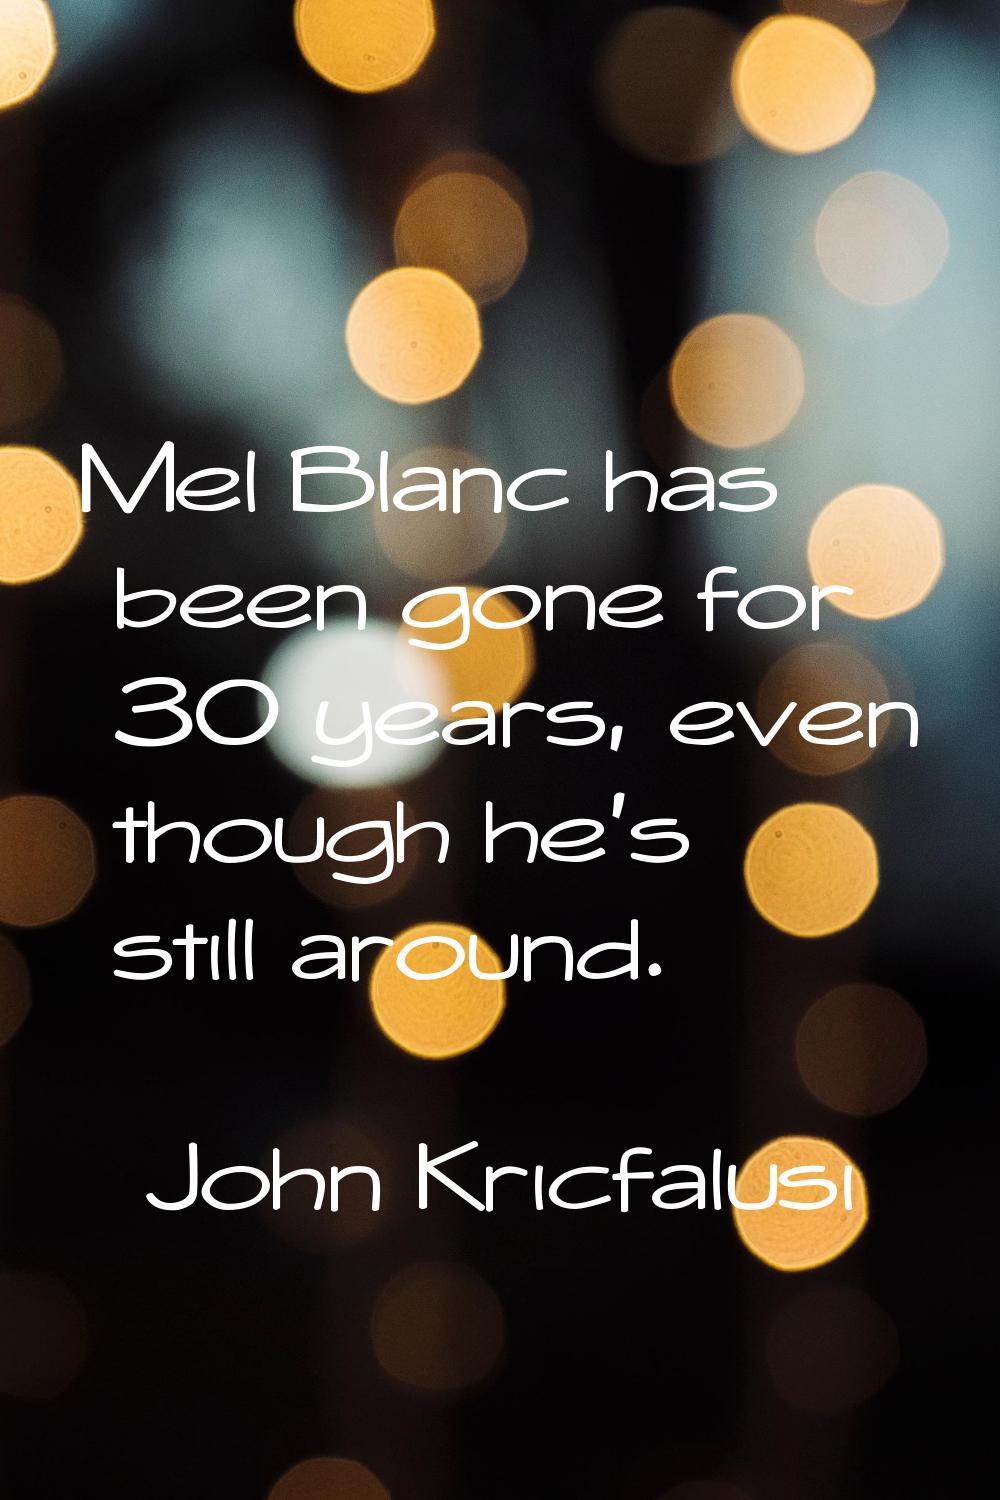 Mel Blanc has been gone for 30 years, even though he's still around.